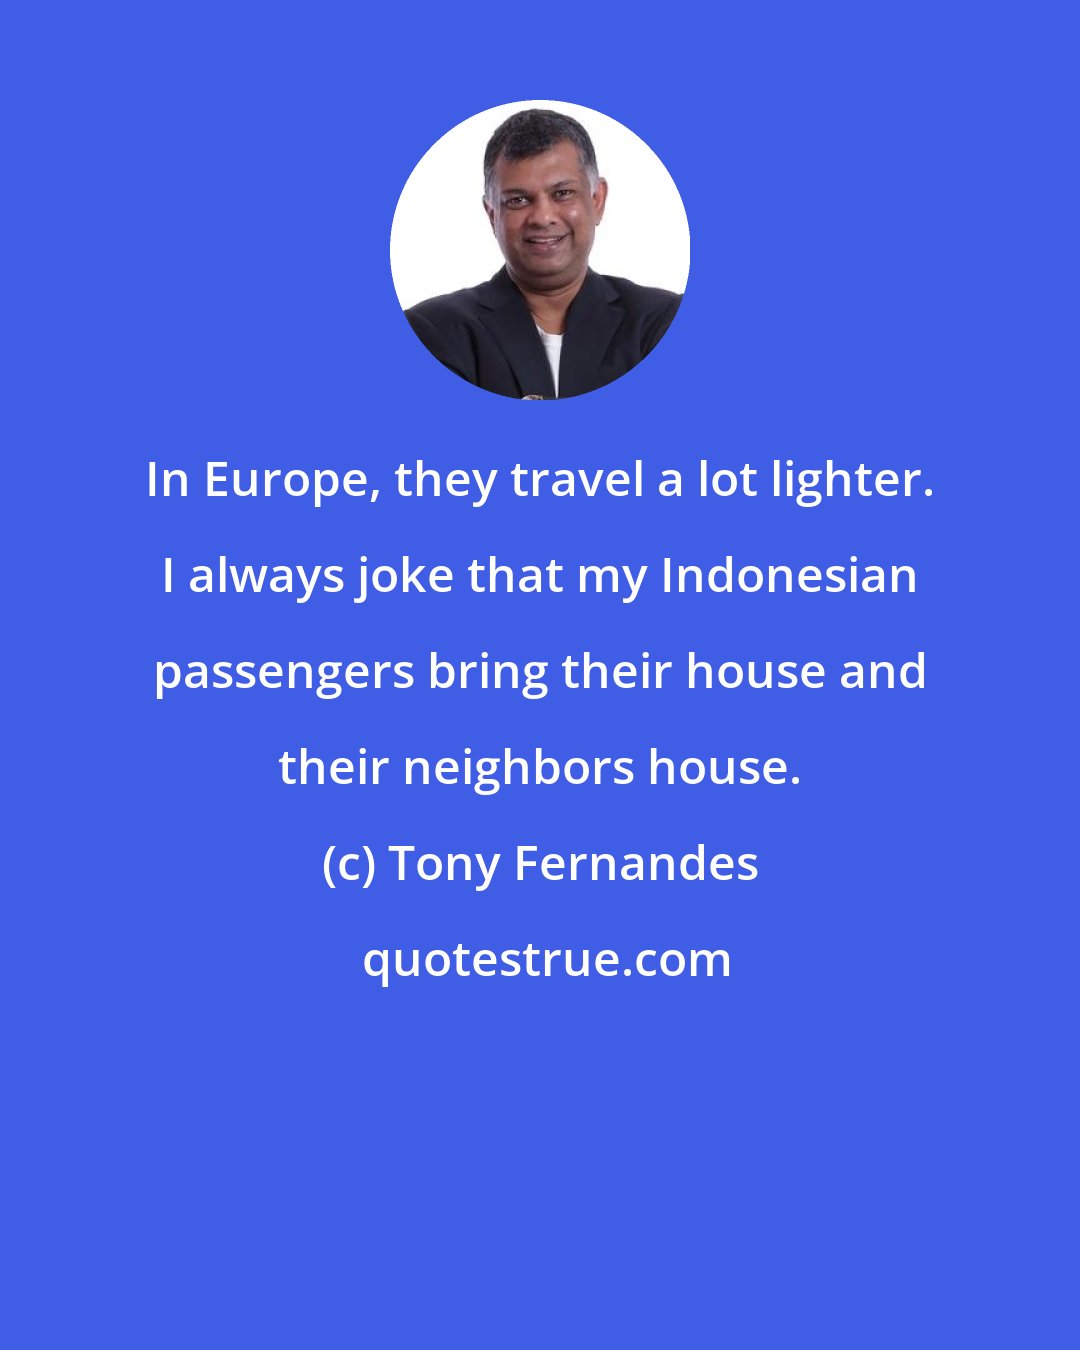 Tony Fernandes: In Europe, they travel a lot lighter. I always joke that my Indonesian passengers bring their house and their neighbors house.